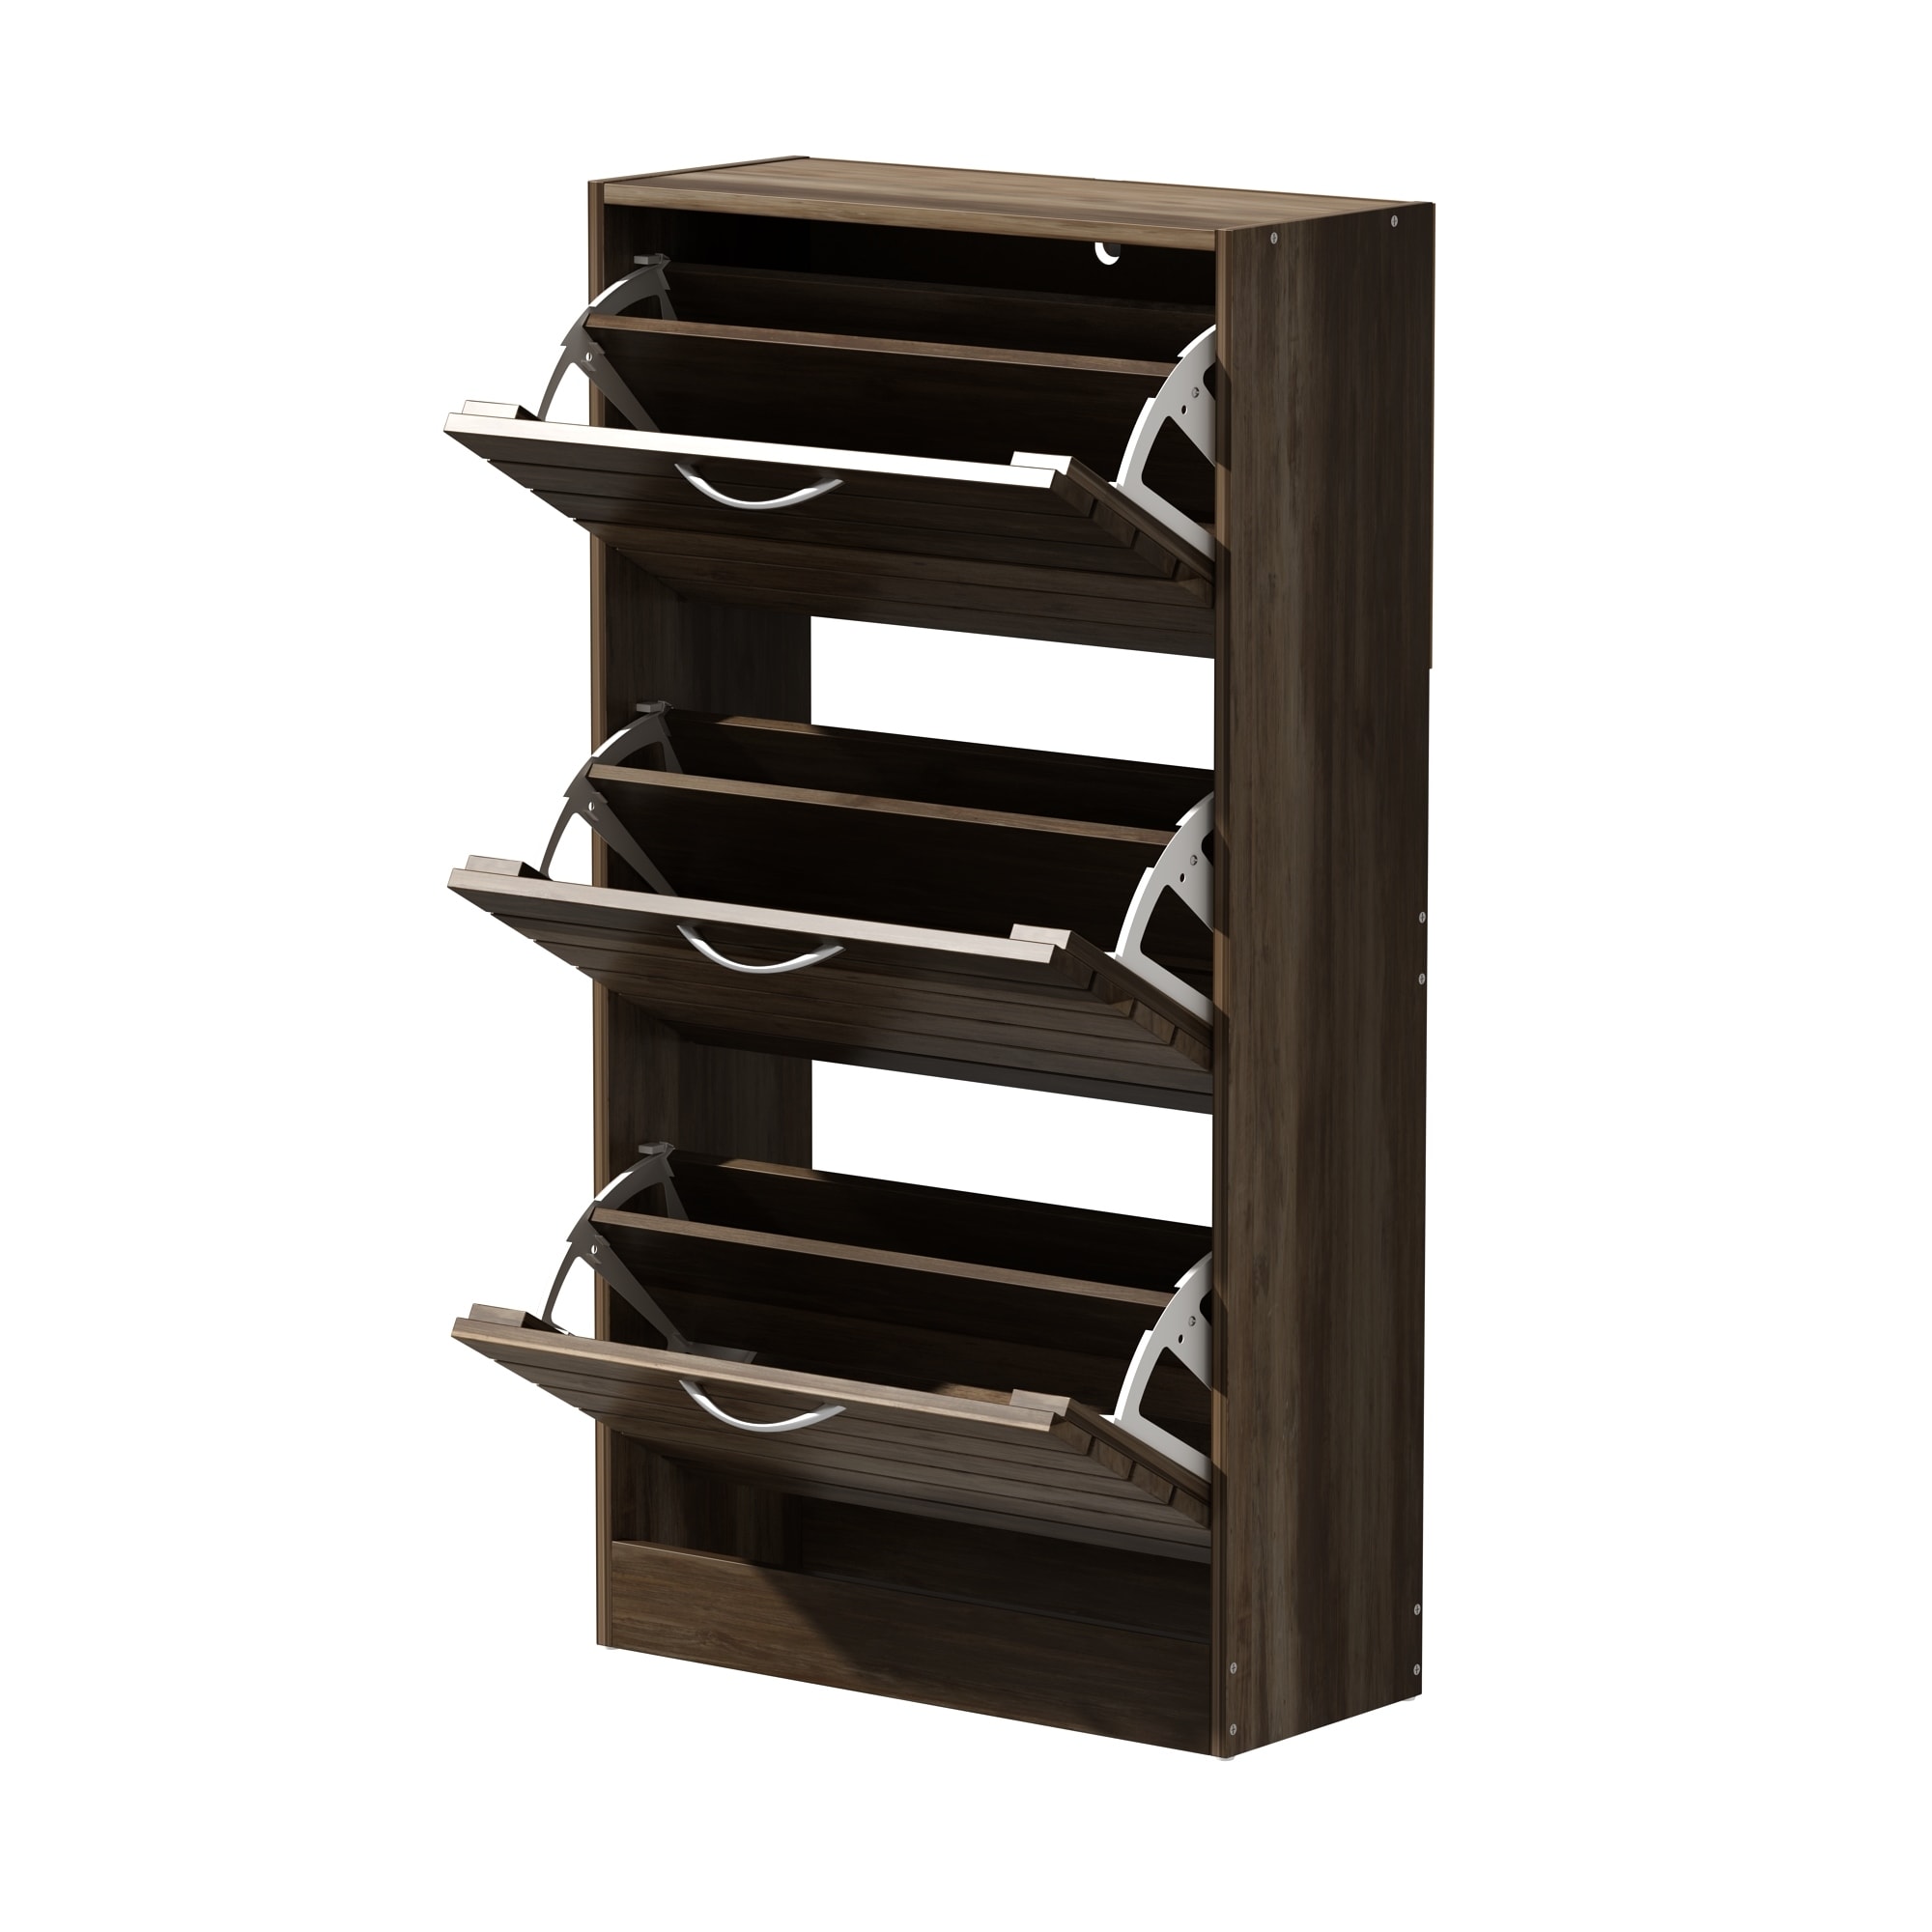 https://ak1.ostkcdn.com/images/products/is/images/direct/4272a79f6f7ec8e6902dcb3d908e04911bac29be/Shoe-Storage-Cabinet-Modern-Shoe-Storage-Cabinet-for-Entryway-Hallway.jpg